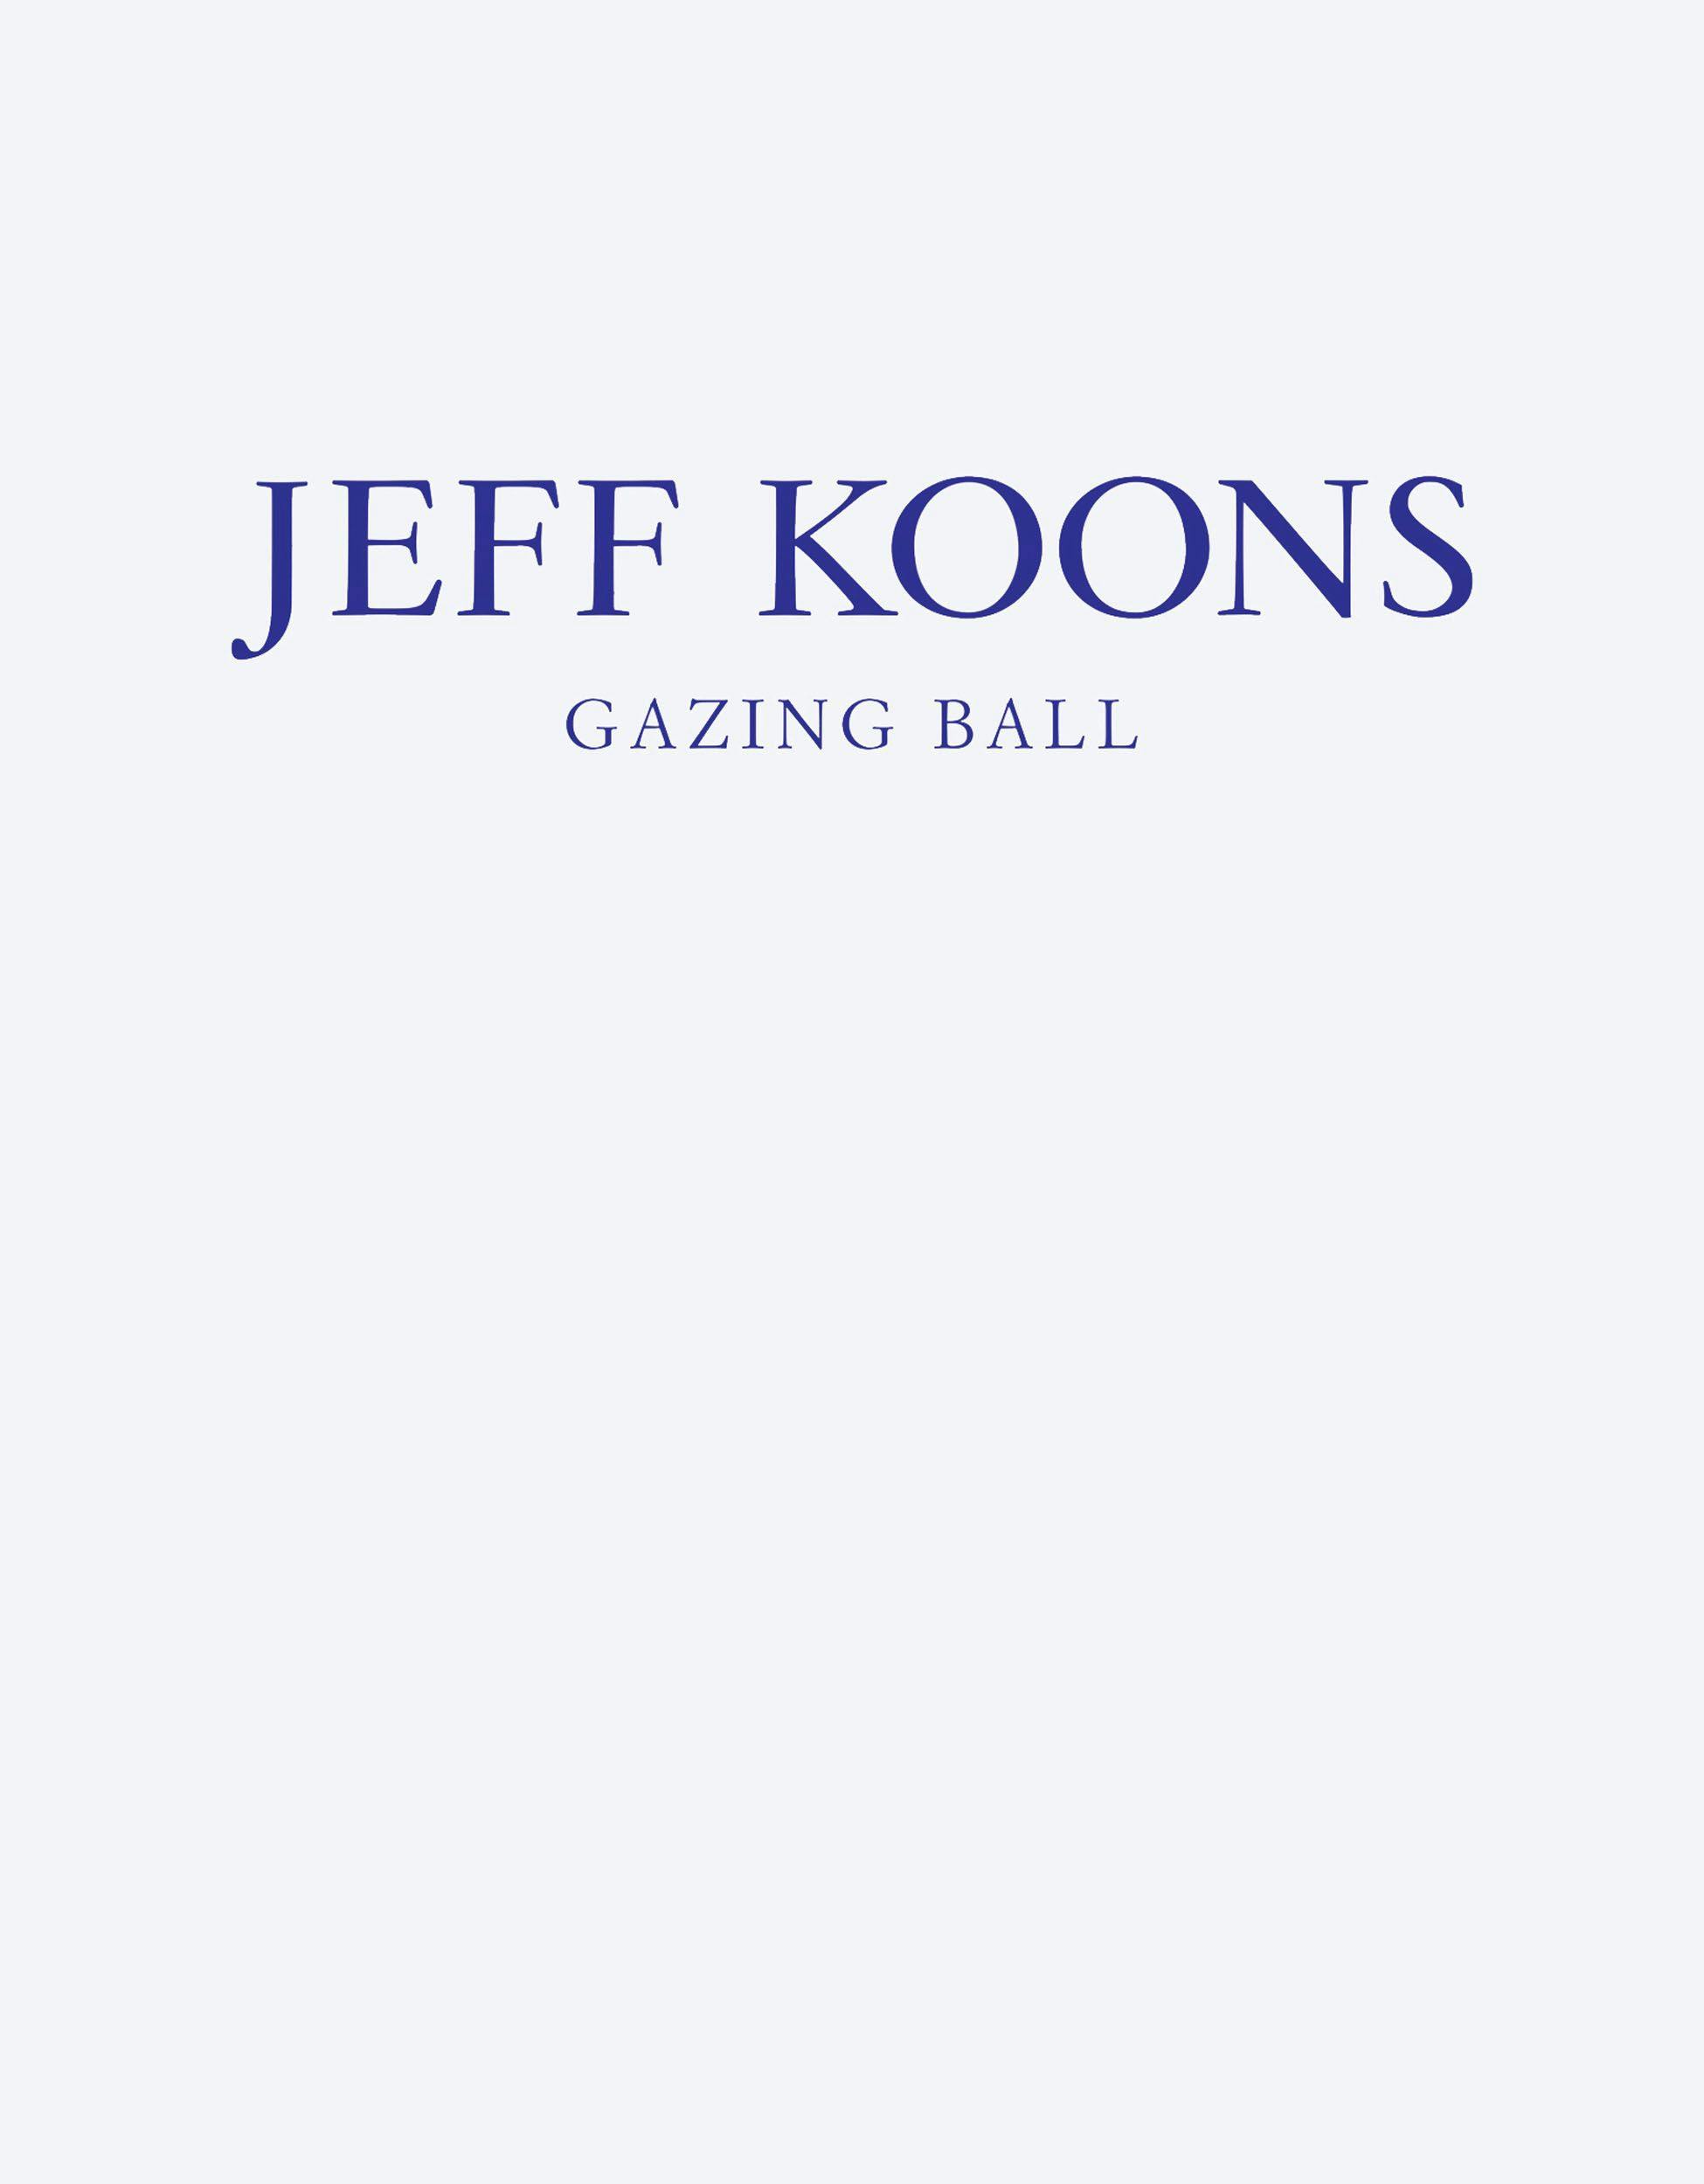 A photograph the book Jeff Koons: Gazing Ball, dated 2014.